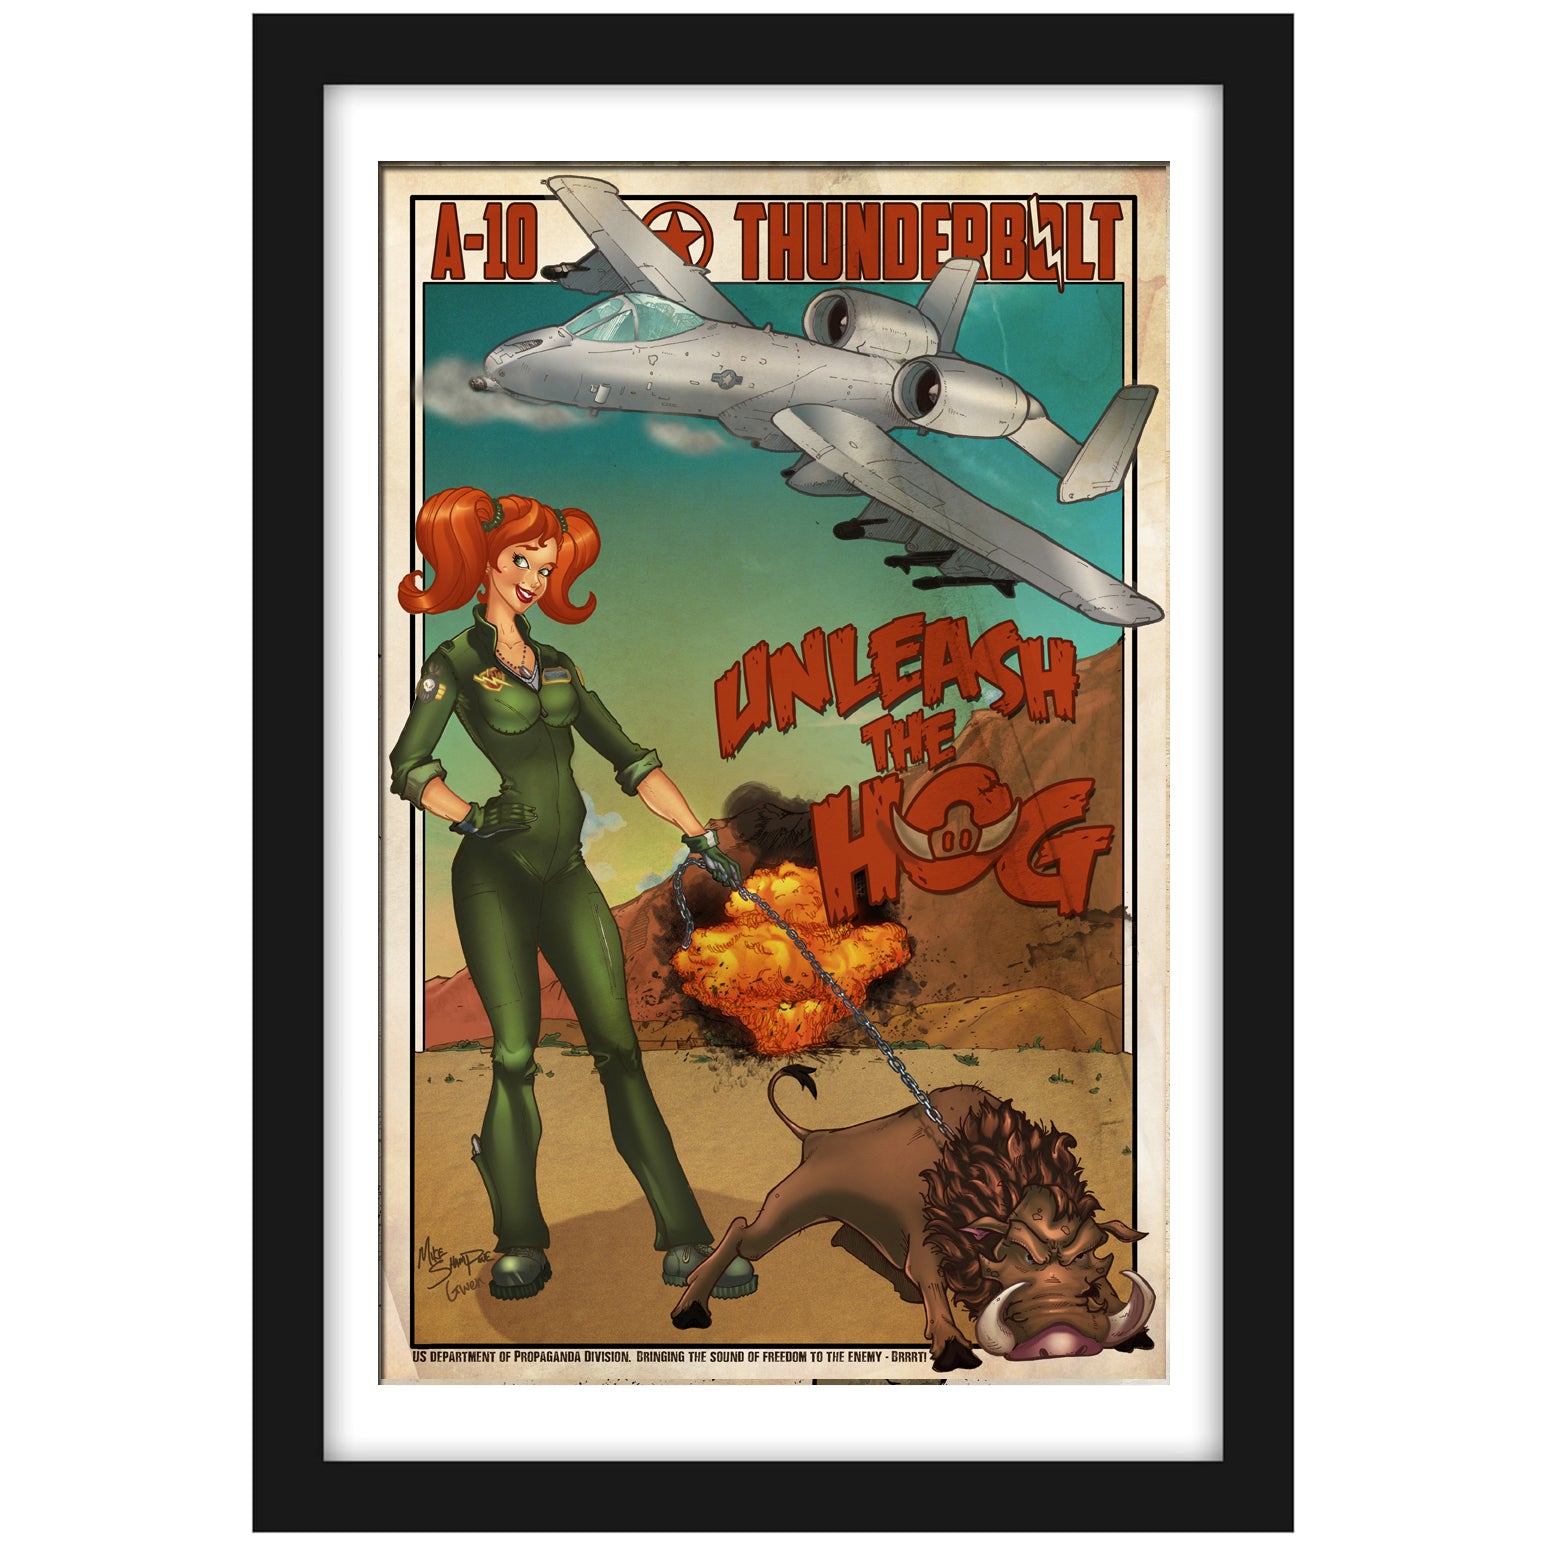 A-10 "Gwen" - Vintage Print Pinup & Airplane Art by Mike Shampine - Signed and Numbered